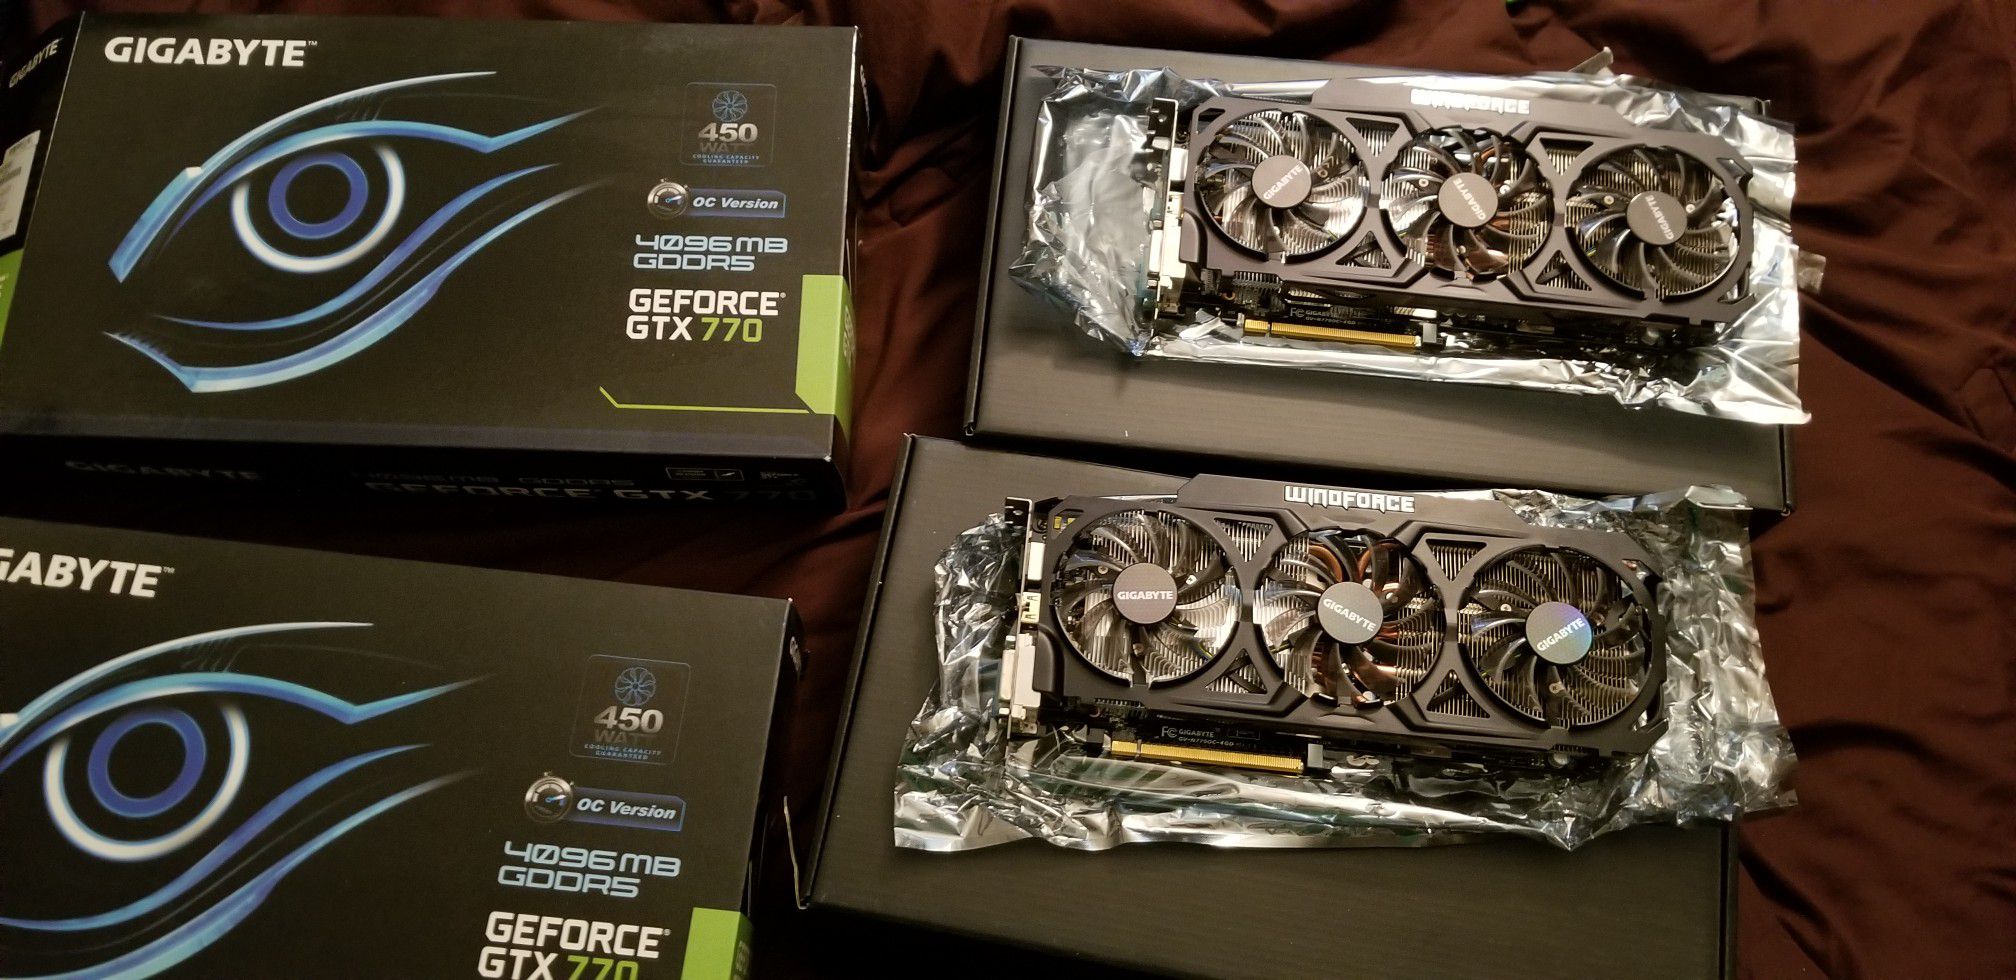 gigabyte geforce gtx 770 4gb both for sell together in good condition